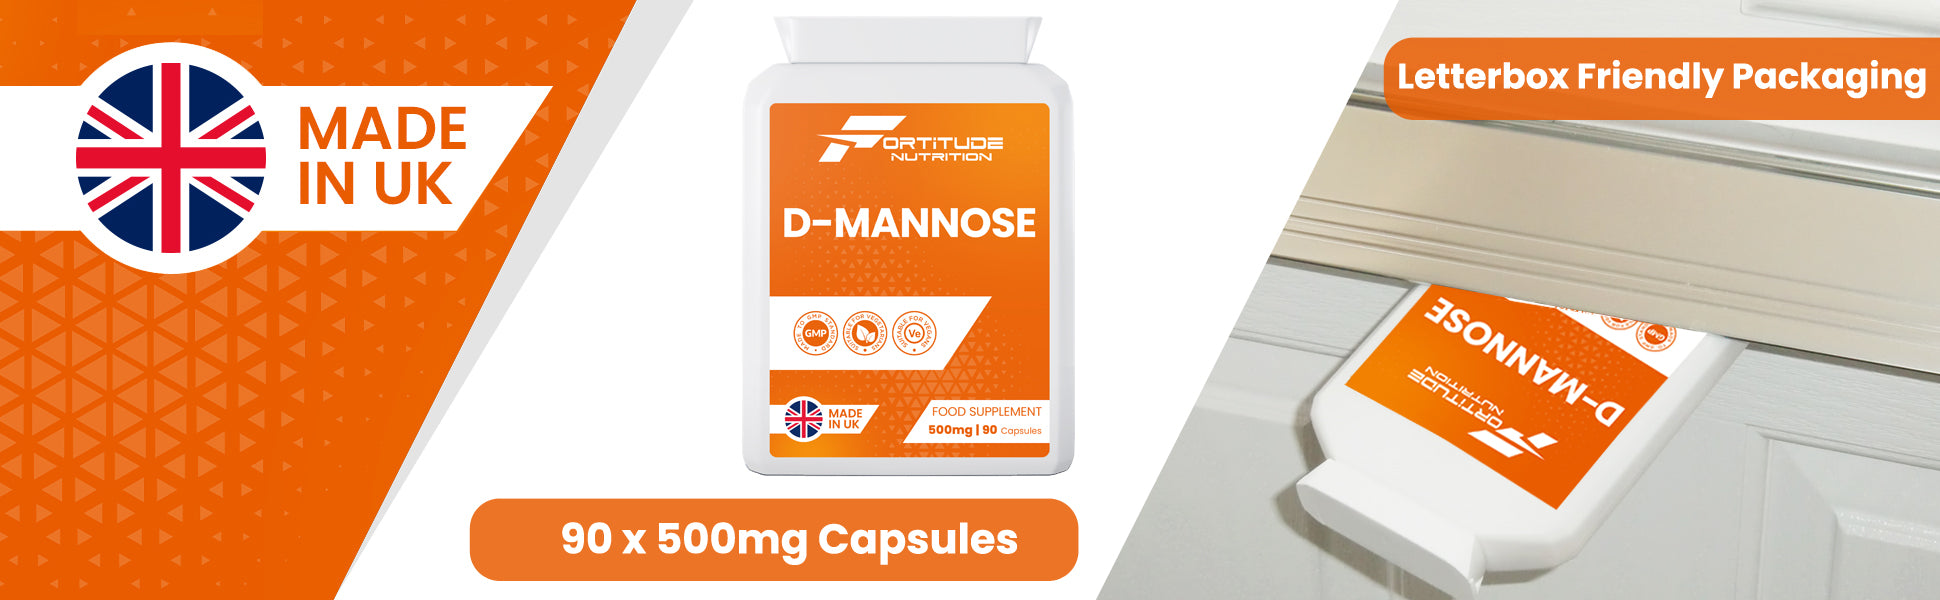 D Mannose Supplements In Letterbox Friendly Packaging